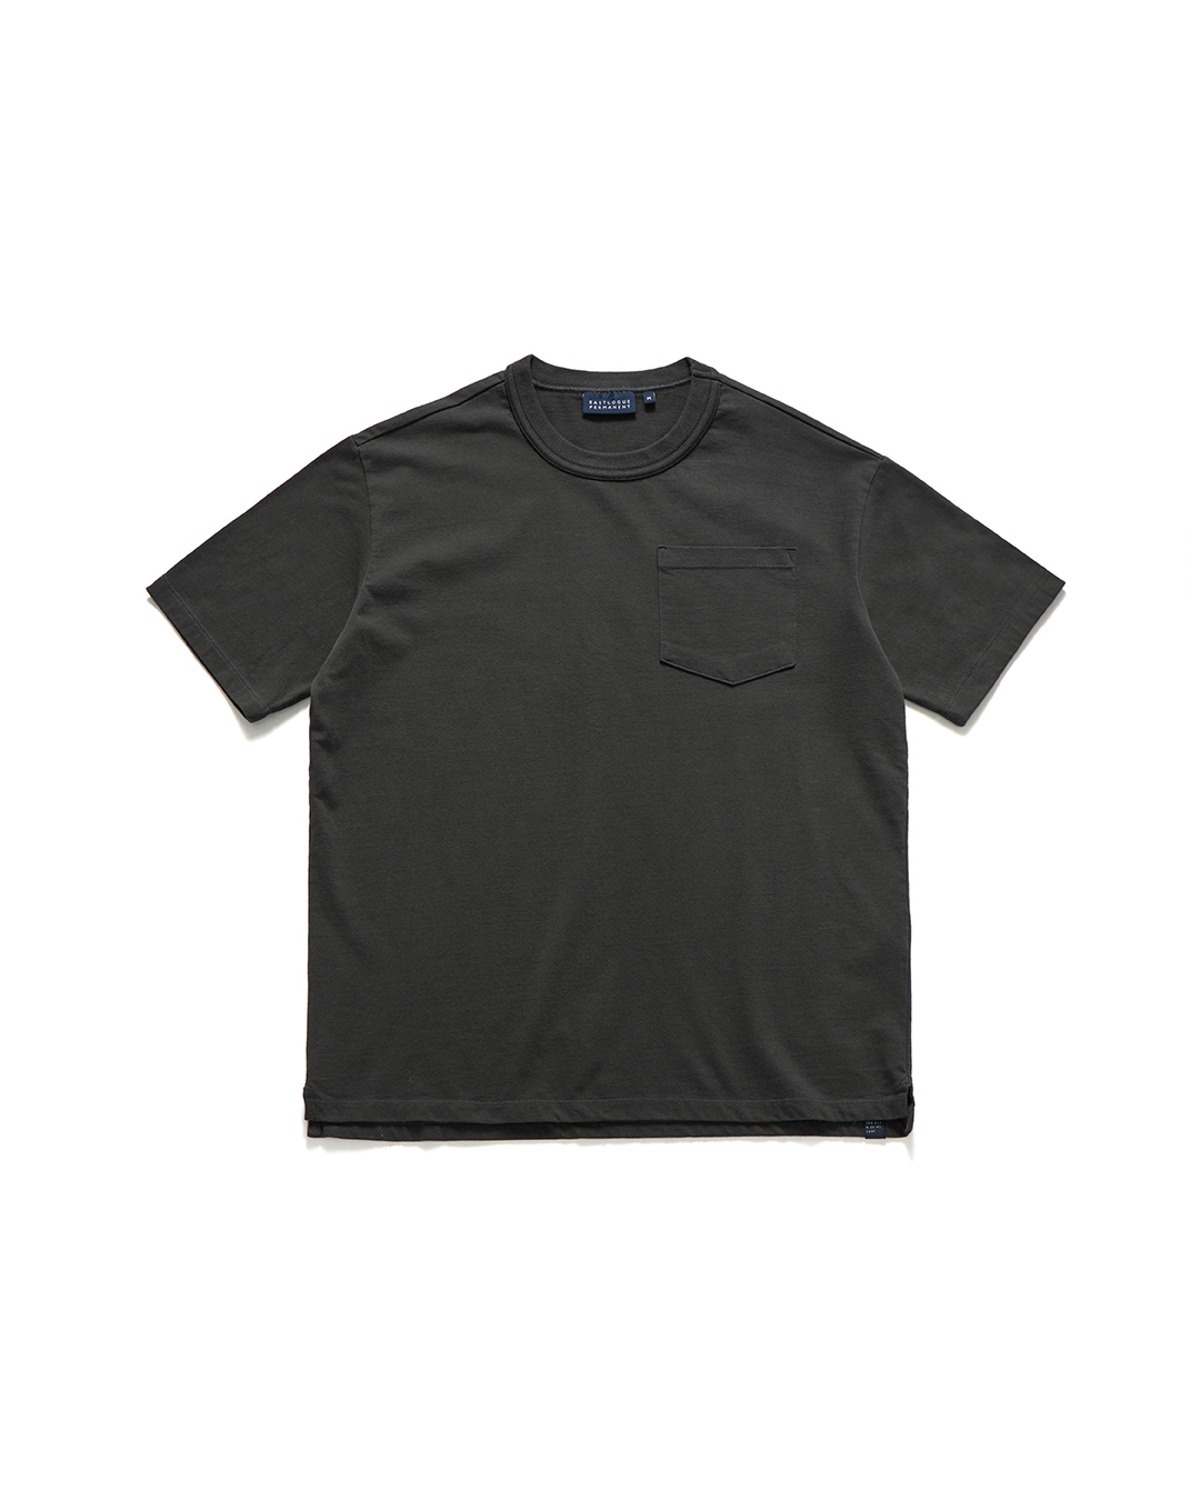 ONE POCKET T-SHIRT (new ver.) / CHARCOAL